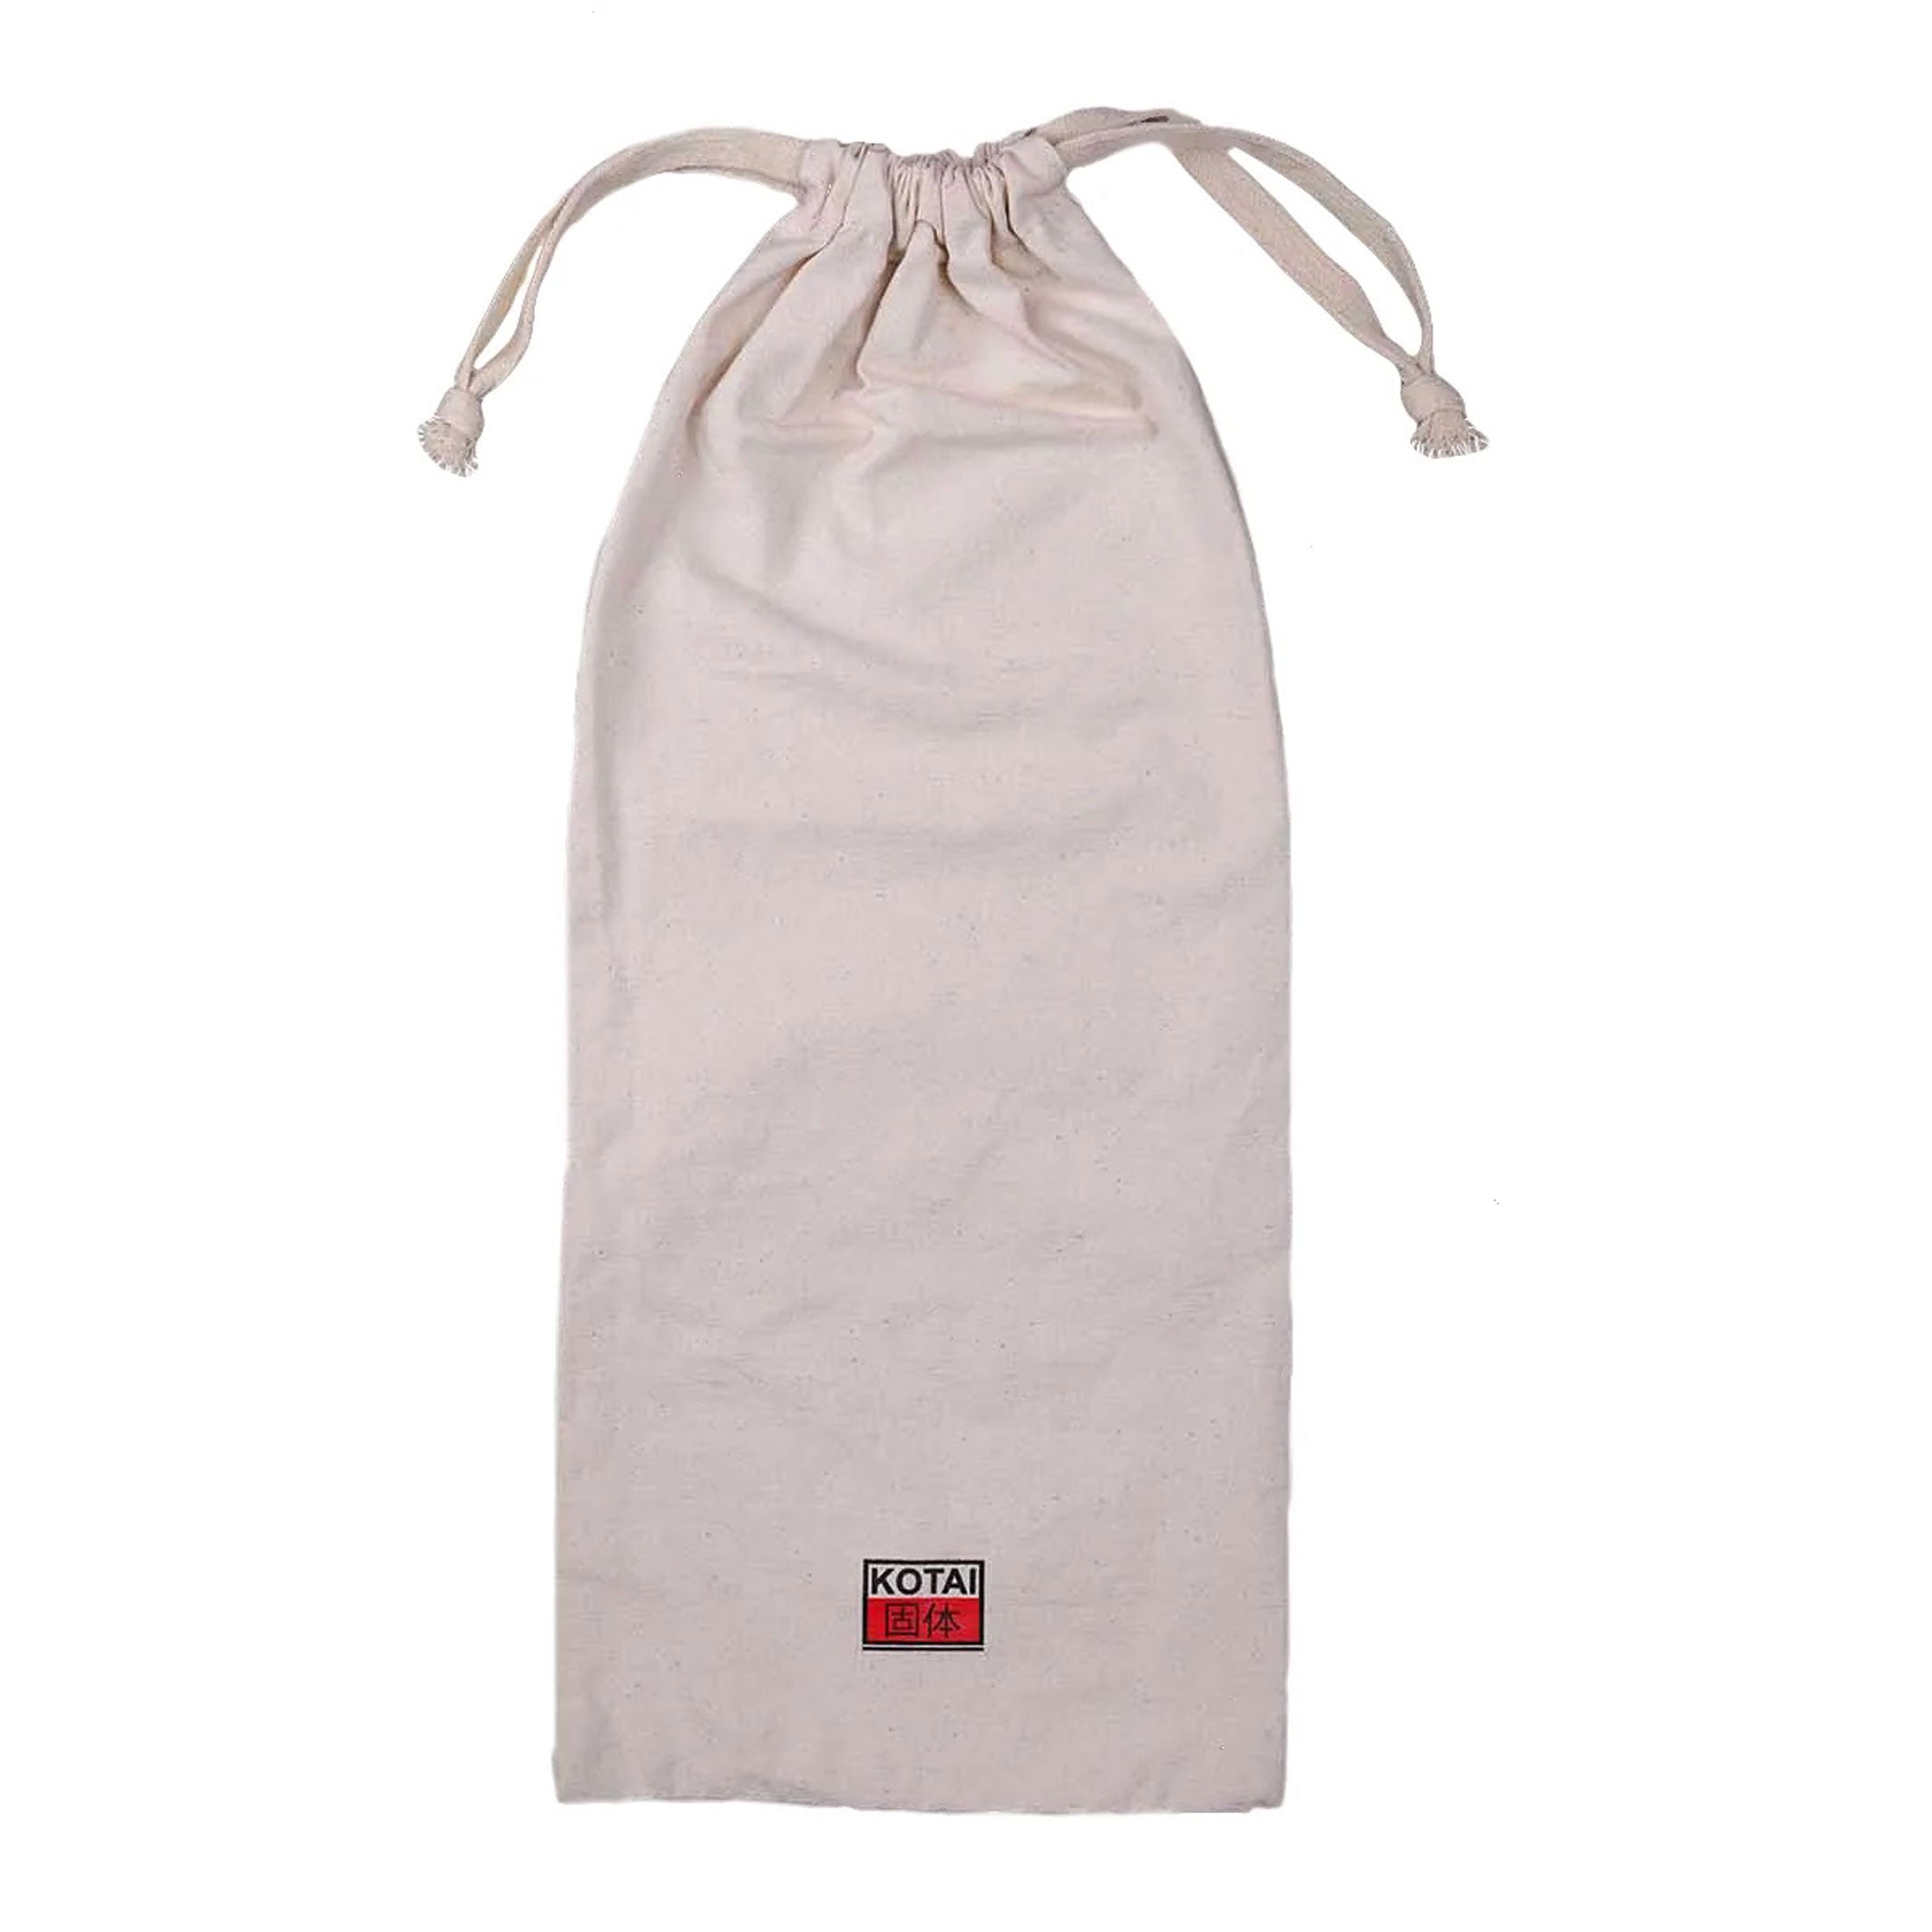 CHEF KNIFE ROLL-UP BAG | TRAVEL KNIFE BAG |  Cotton Canvas & Leather | Kotai